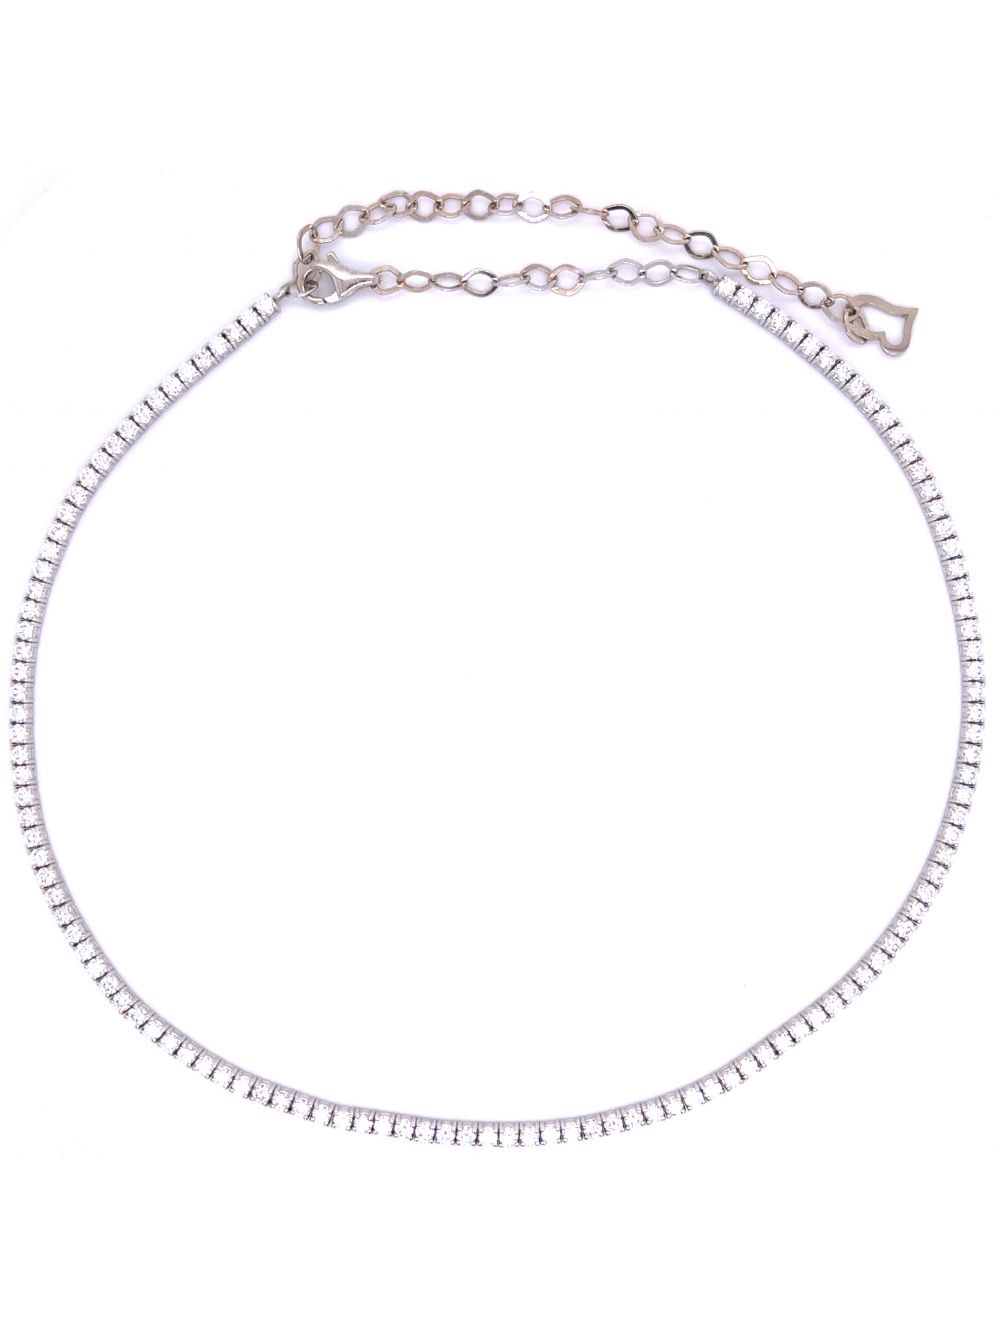 Diamond Tennis Convertible Bracelet and Necklace in 14K White Gold